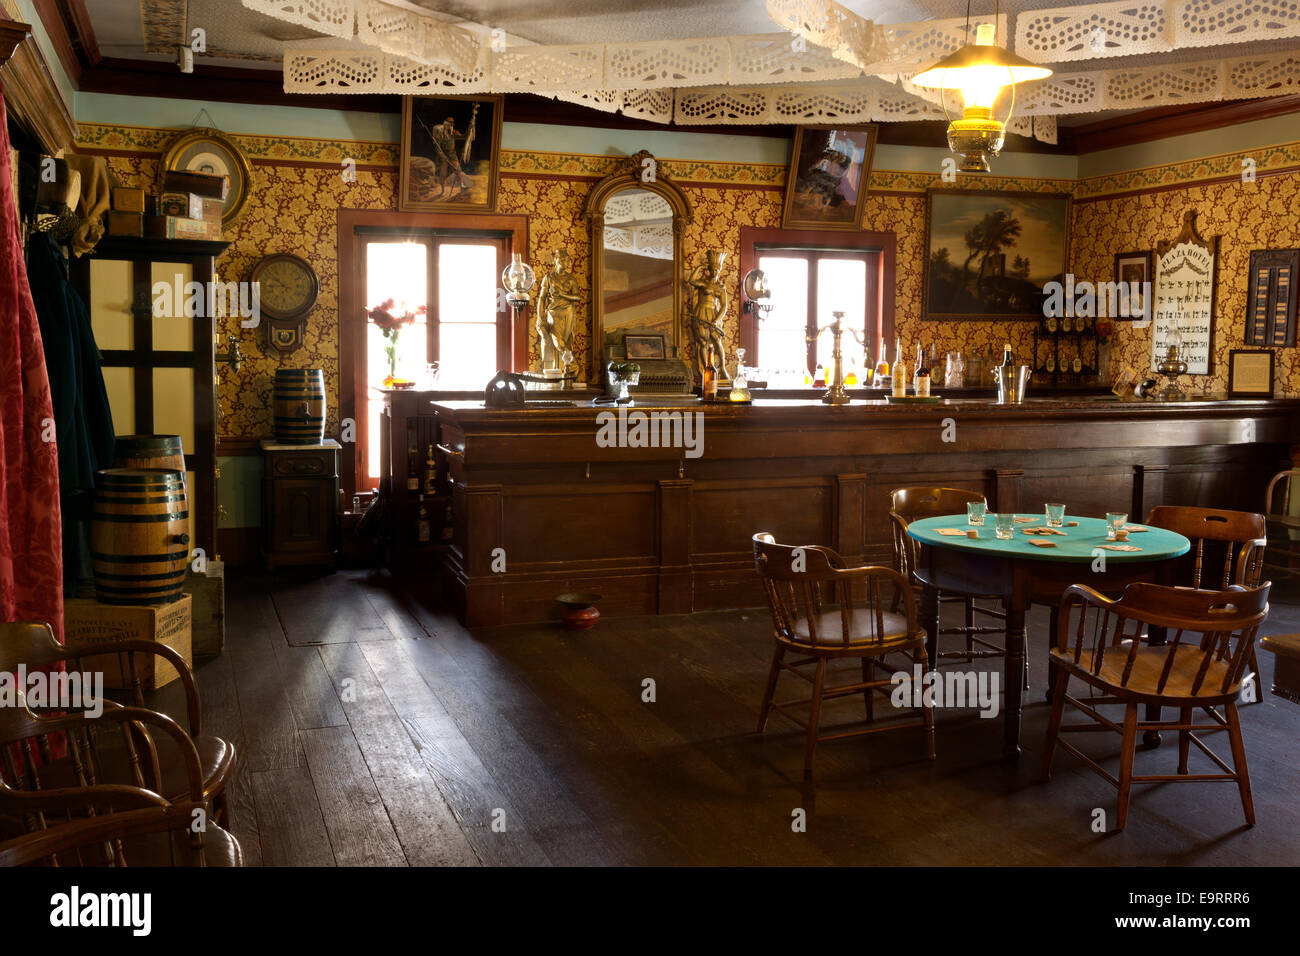 CA02367-00...CALIFORNIA - The saloon at the Plaza Hotel in the San Juan Bautista State Historic Park near Hollister. Stock Photo